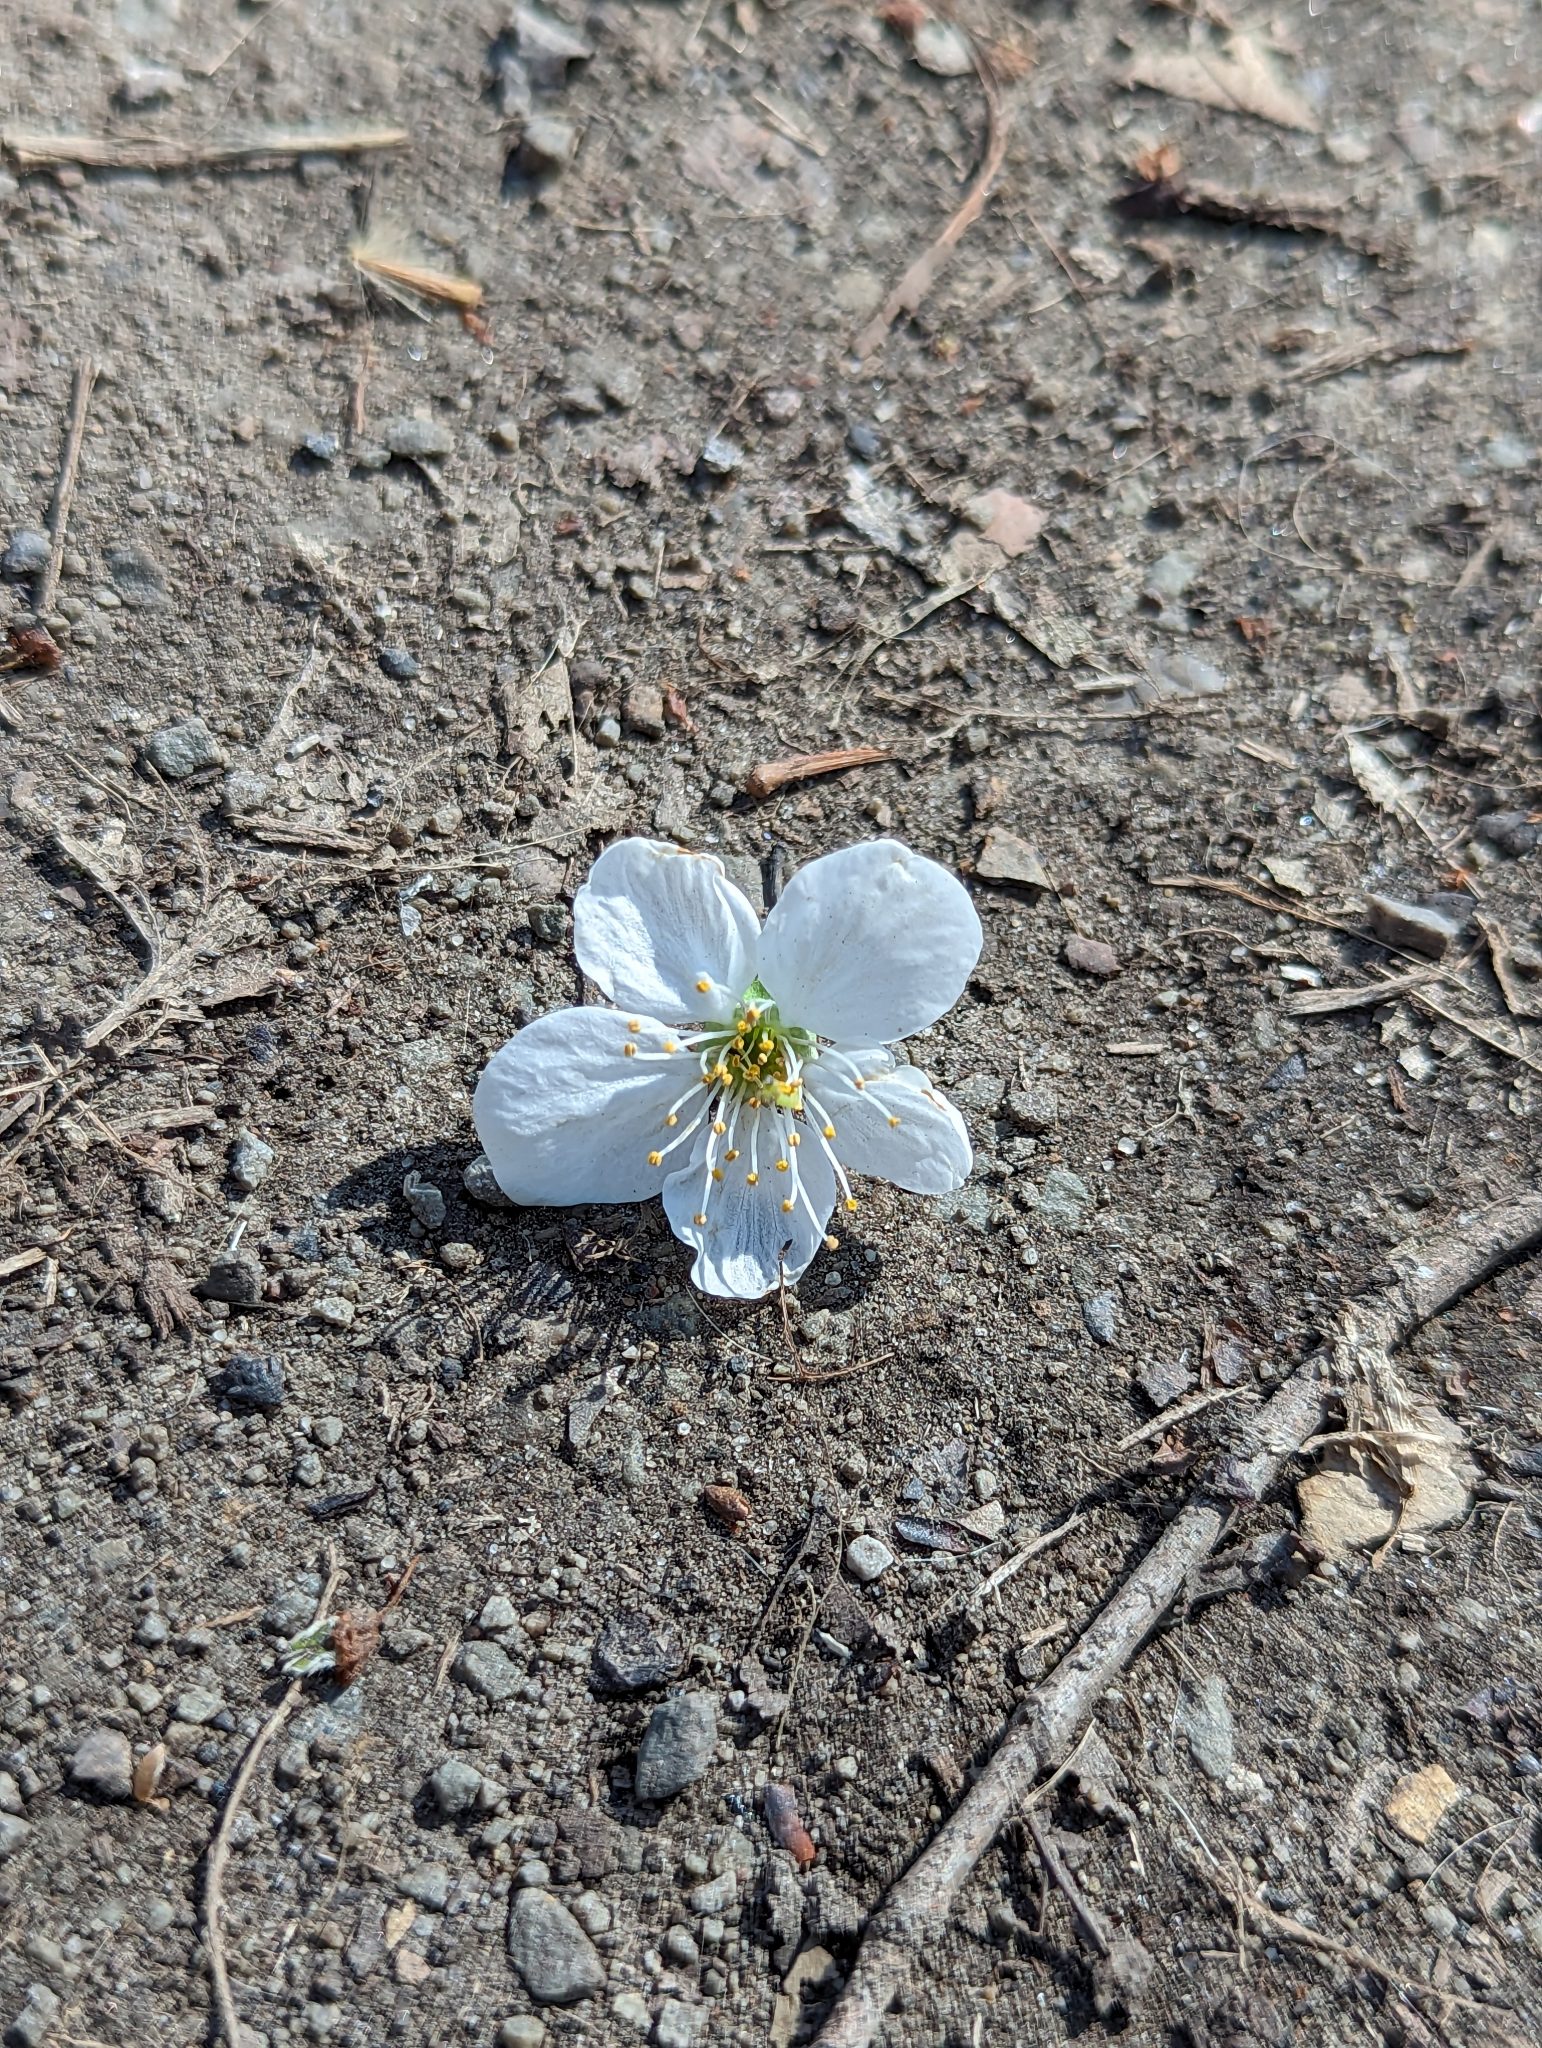 A cherry blossom that has fallen on the concrete